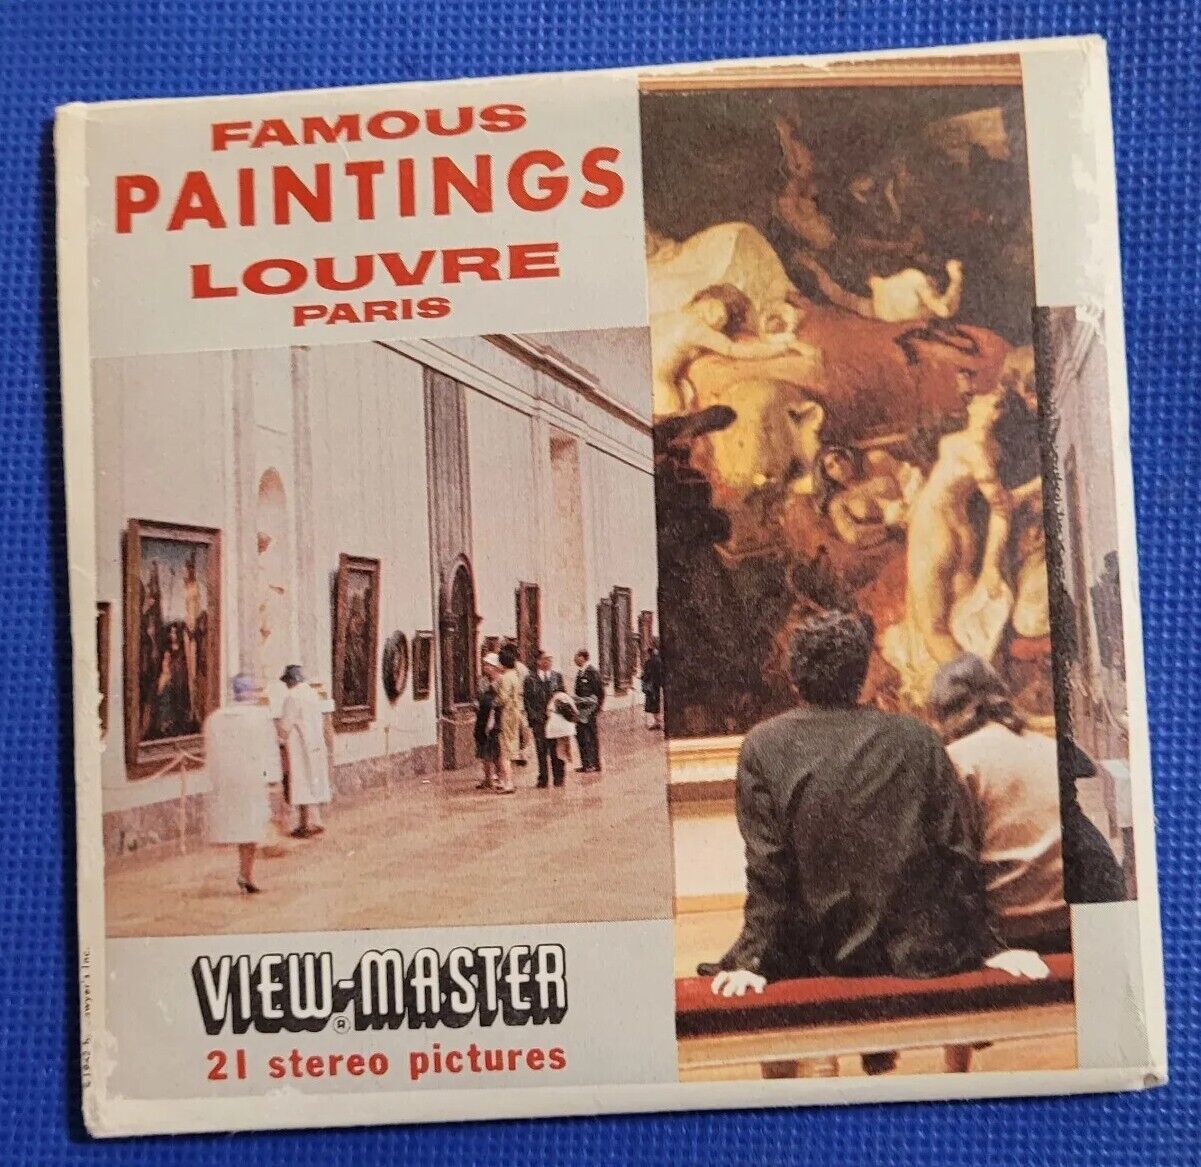 C177 The Louvre Famous Paintings Paris France Sawyer\'s view-master reels packet